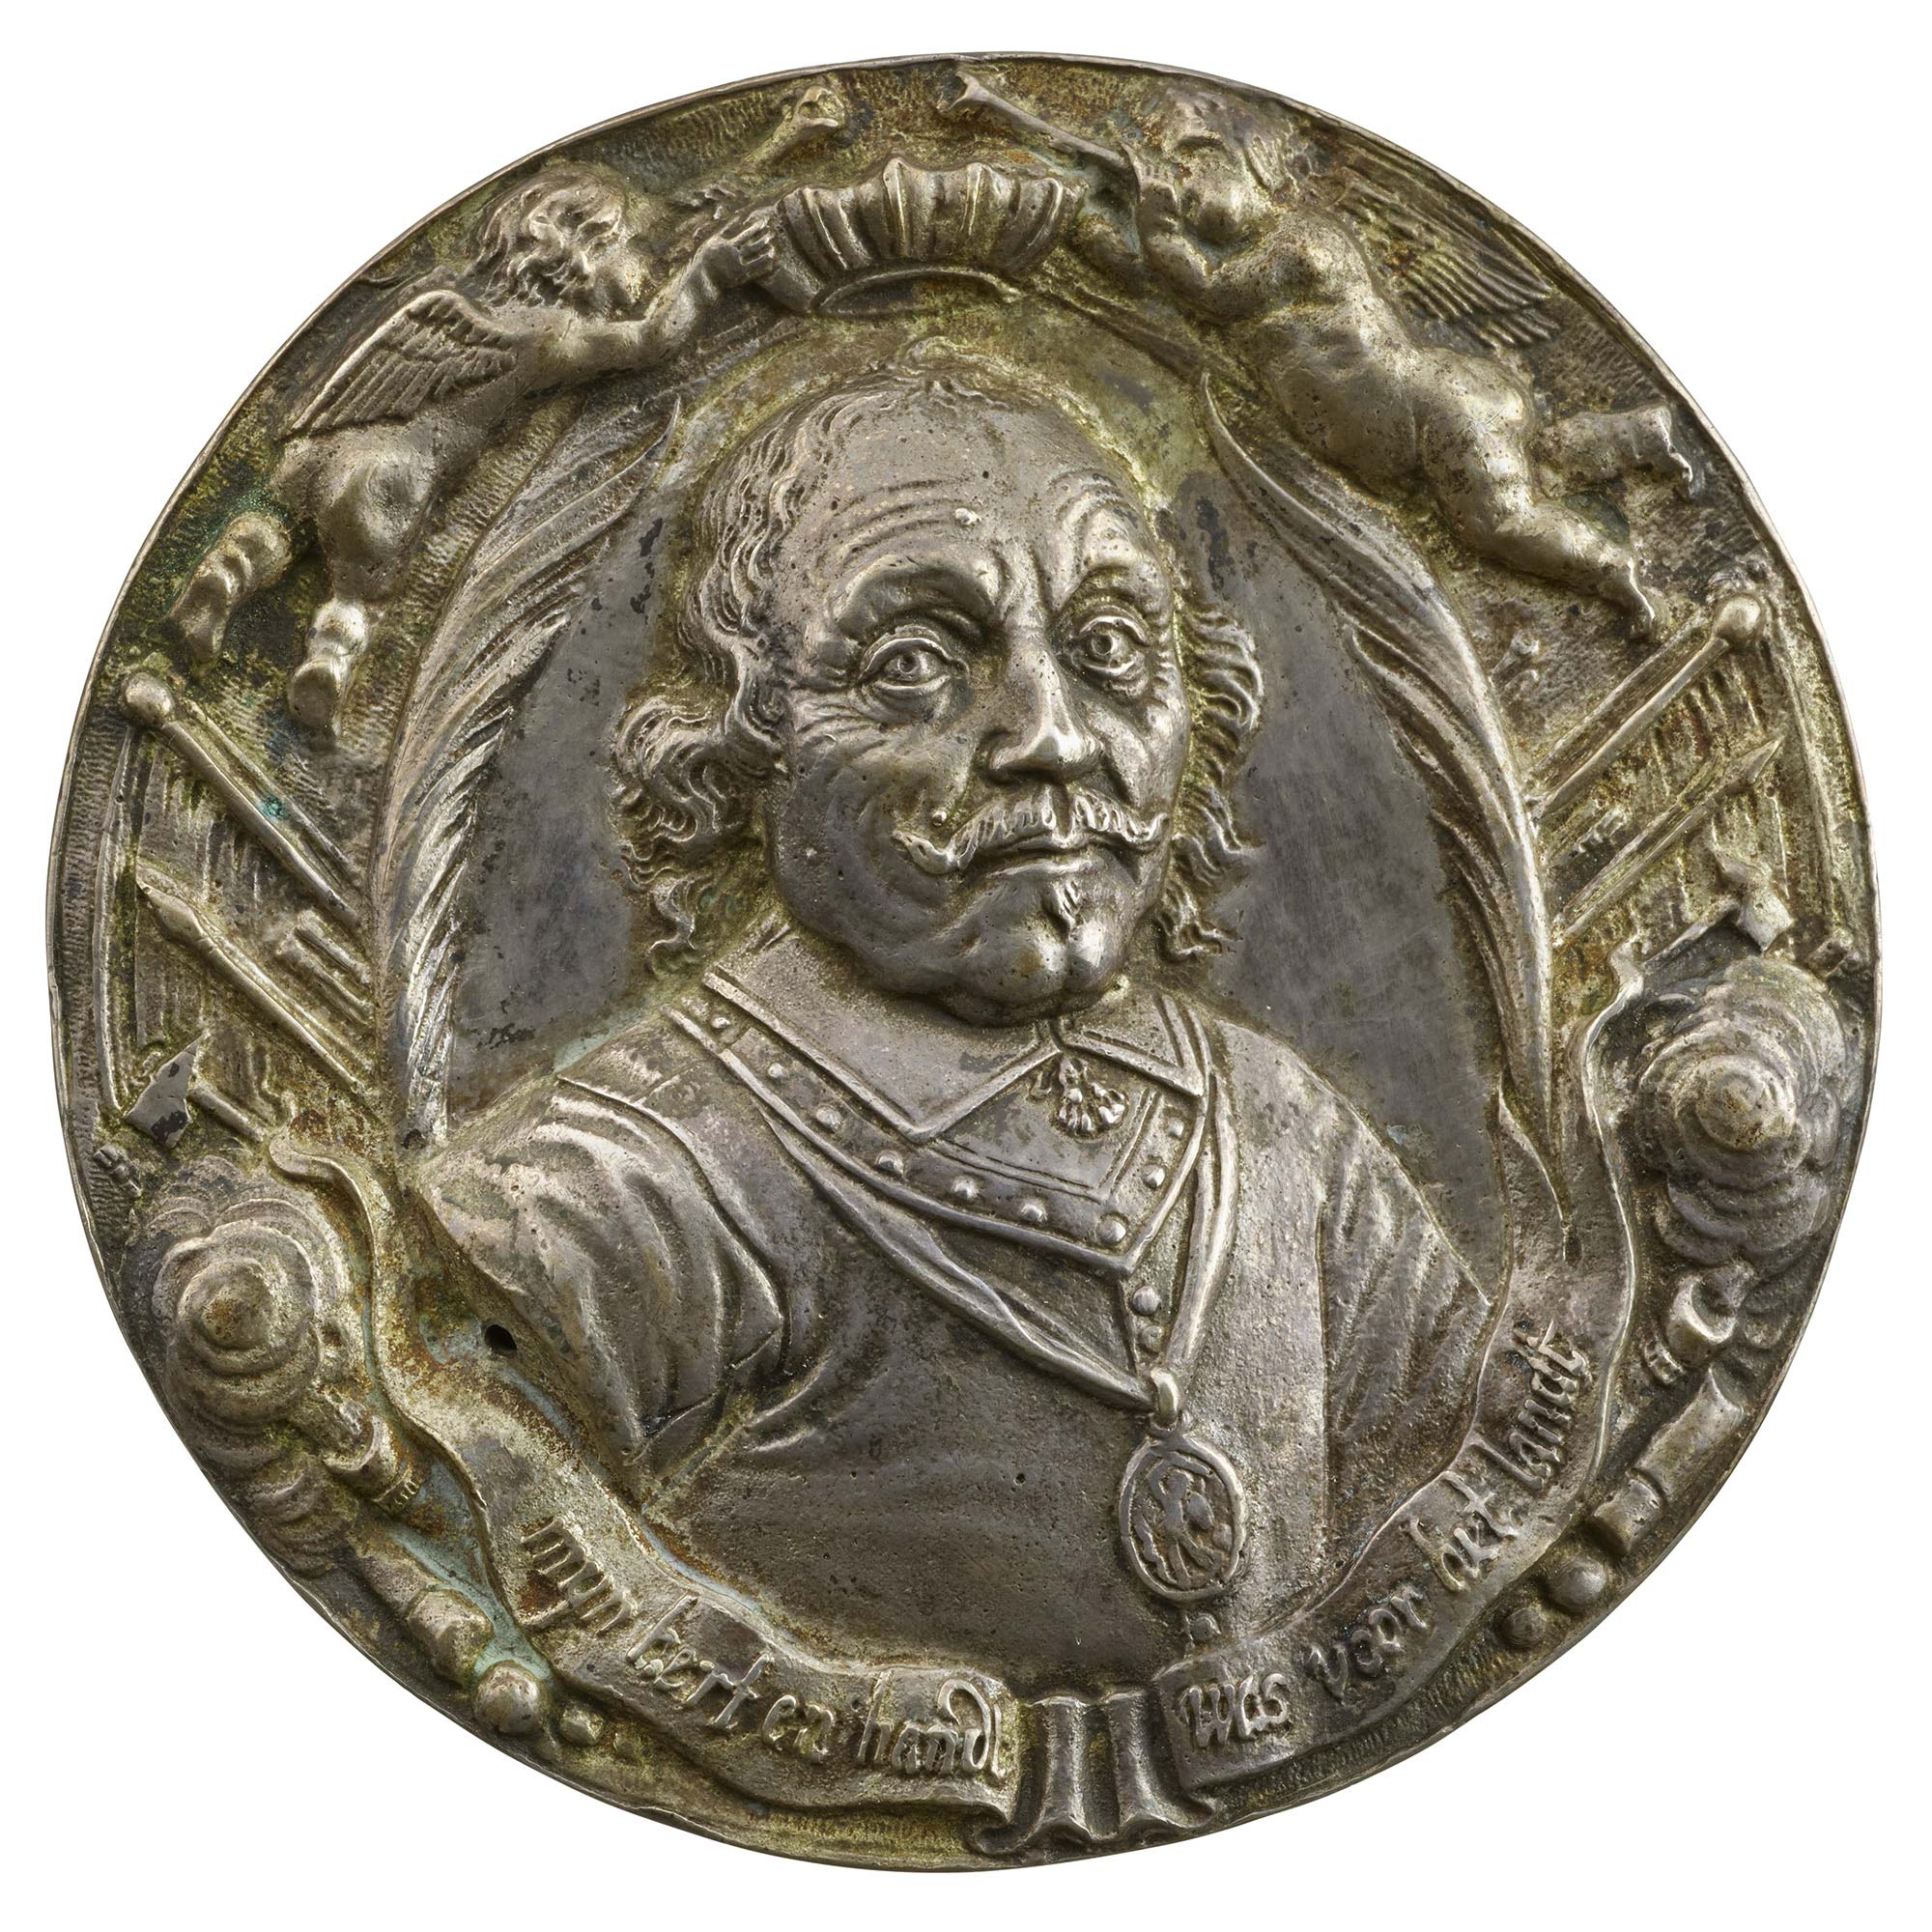 Silver portrait medal of Admiral Maarten Harpertszoon Tromp wearing a plain collar, metal gorget, buttoned doublet, and badge of the Order of St. Michael on a ribbon, flanked by two palm branches, banners, clouds, and cannons. Above, two putti hold a crown over his head formed by the prows of ships